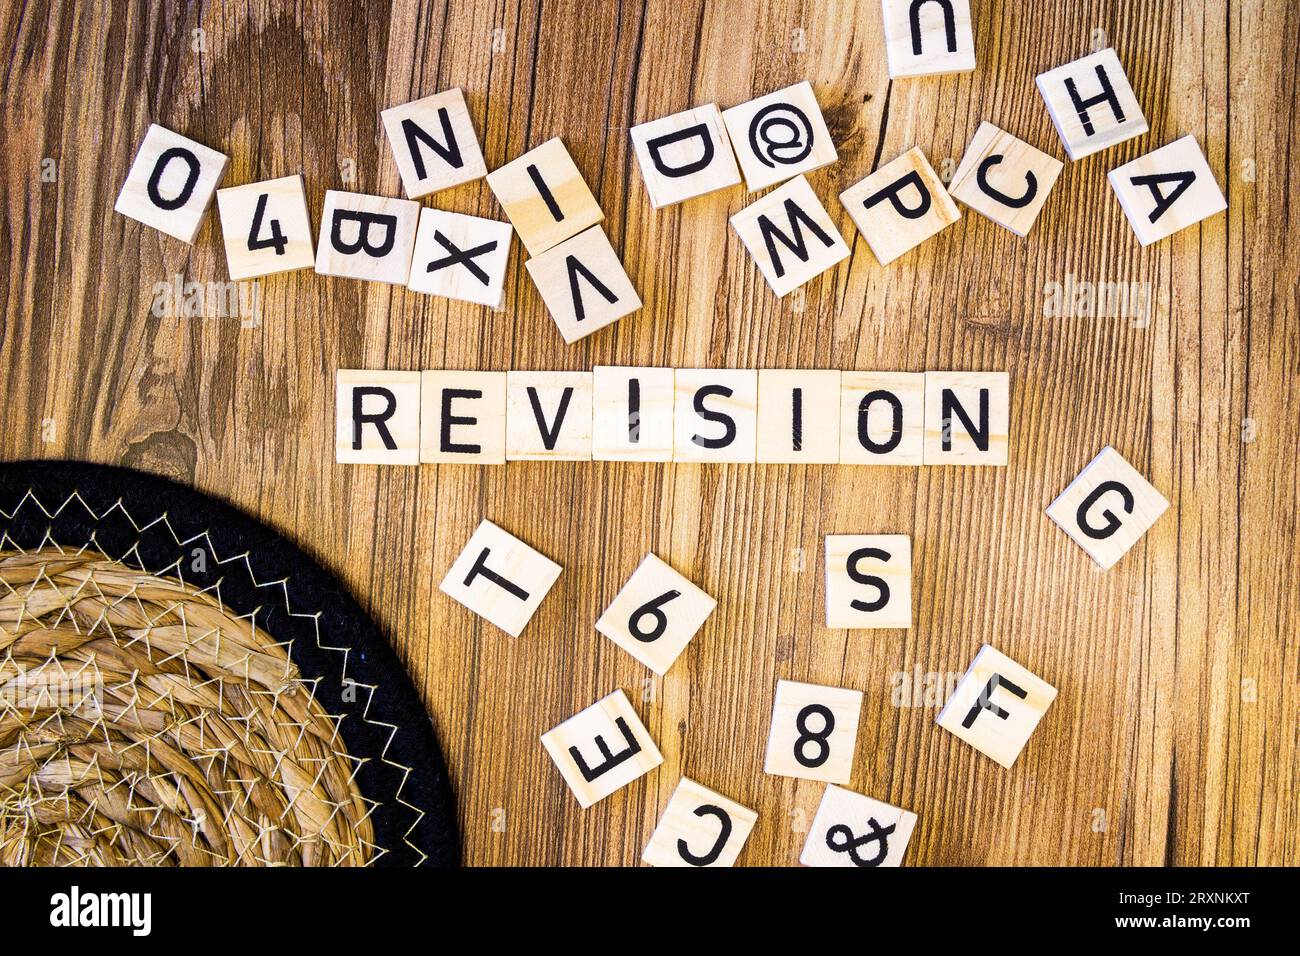 Revision flat lay scattered letters with straw mat Stock Photo